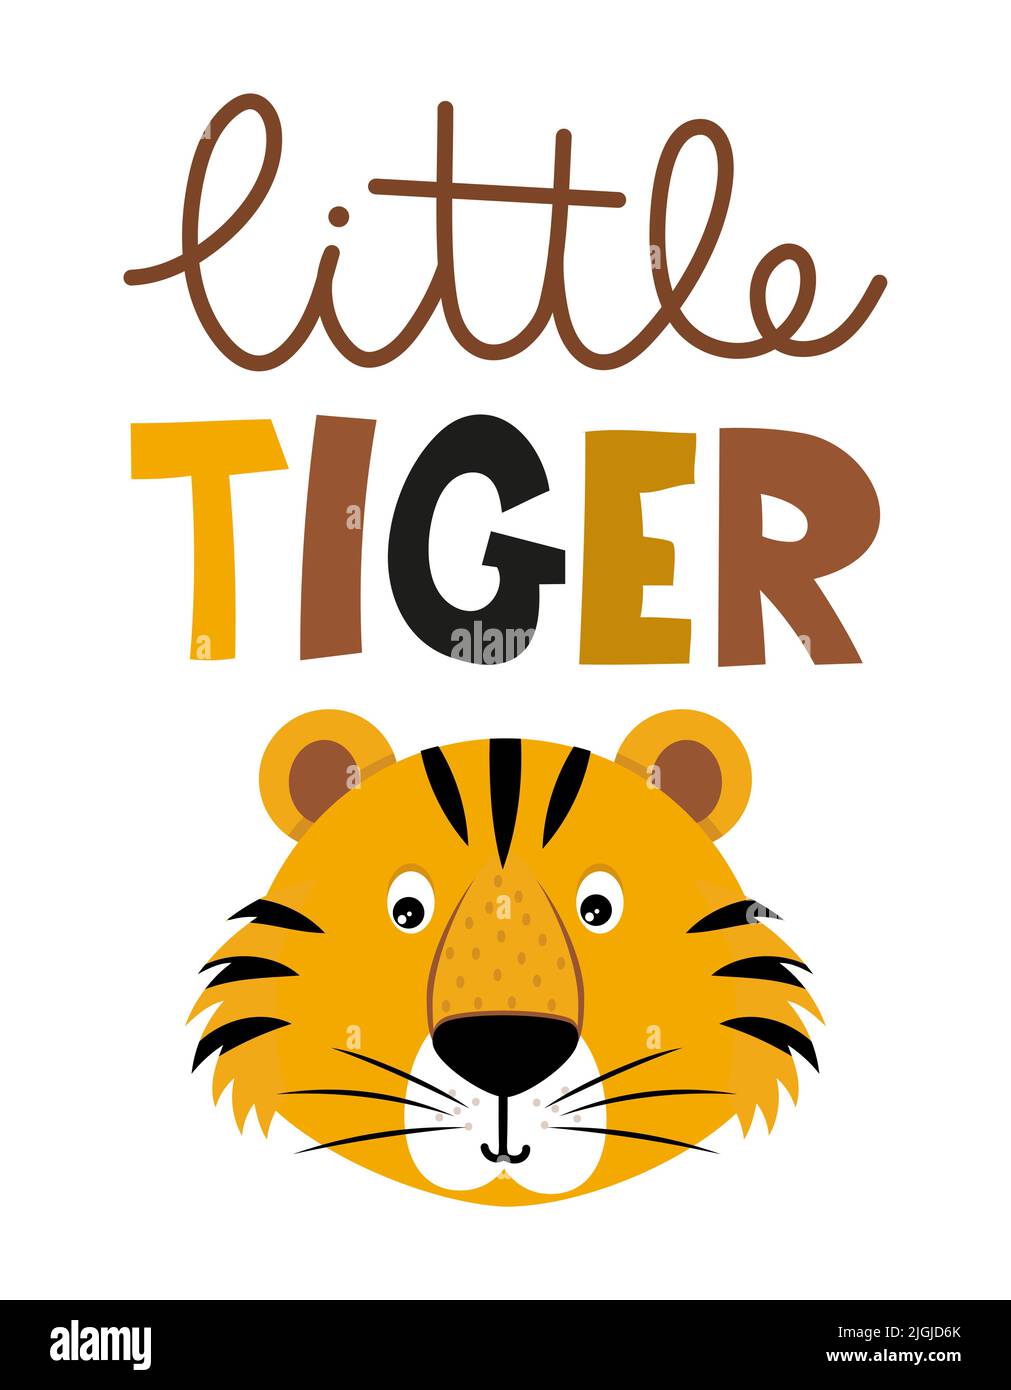 Little Tiger - funny Tiger character drawing. Lettering poster or t shirt textile graphic design.  Cute lion character illustration. Handwritten text. Stock Vector